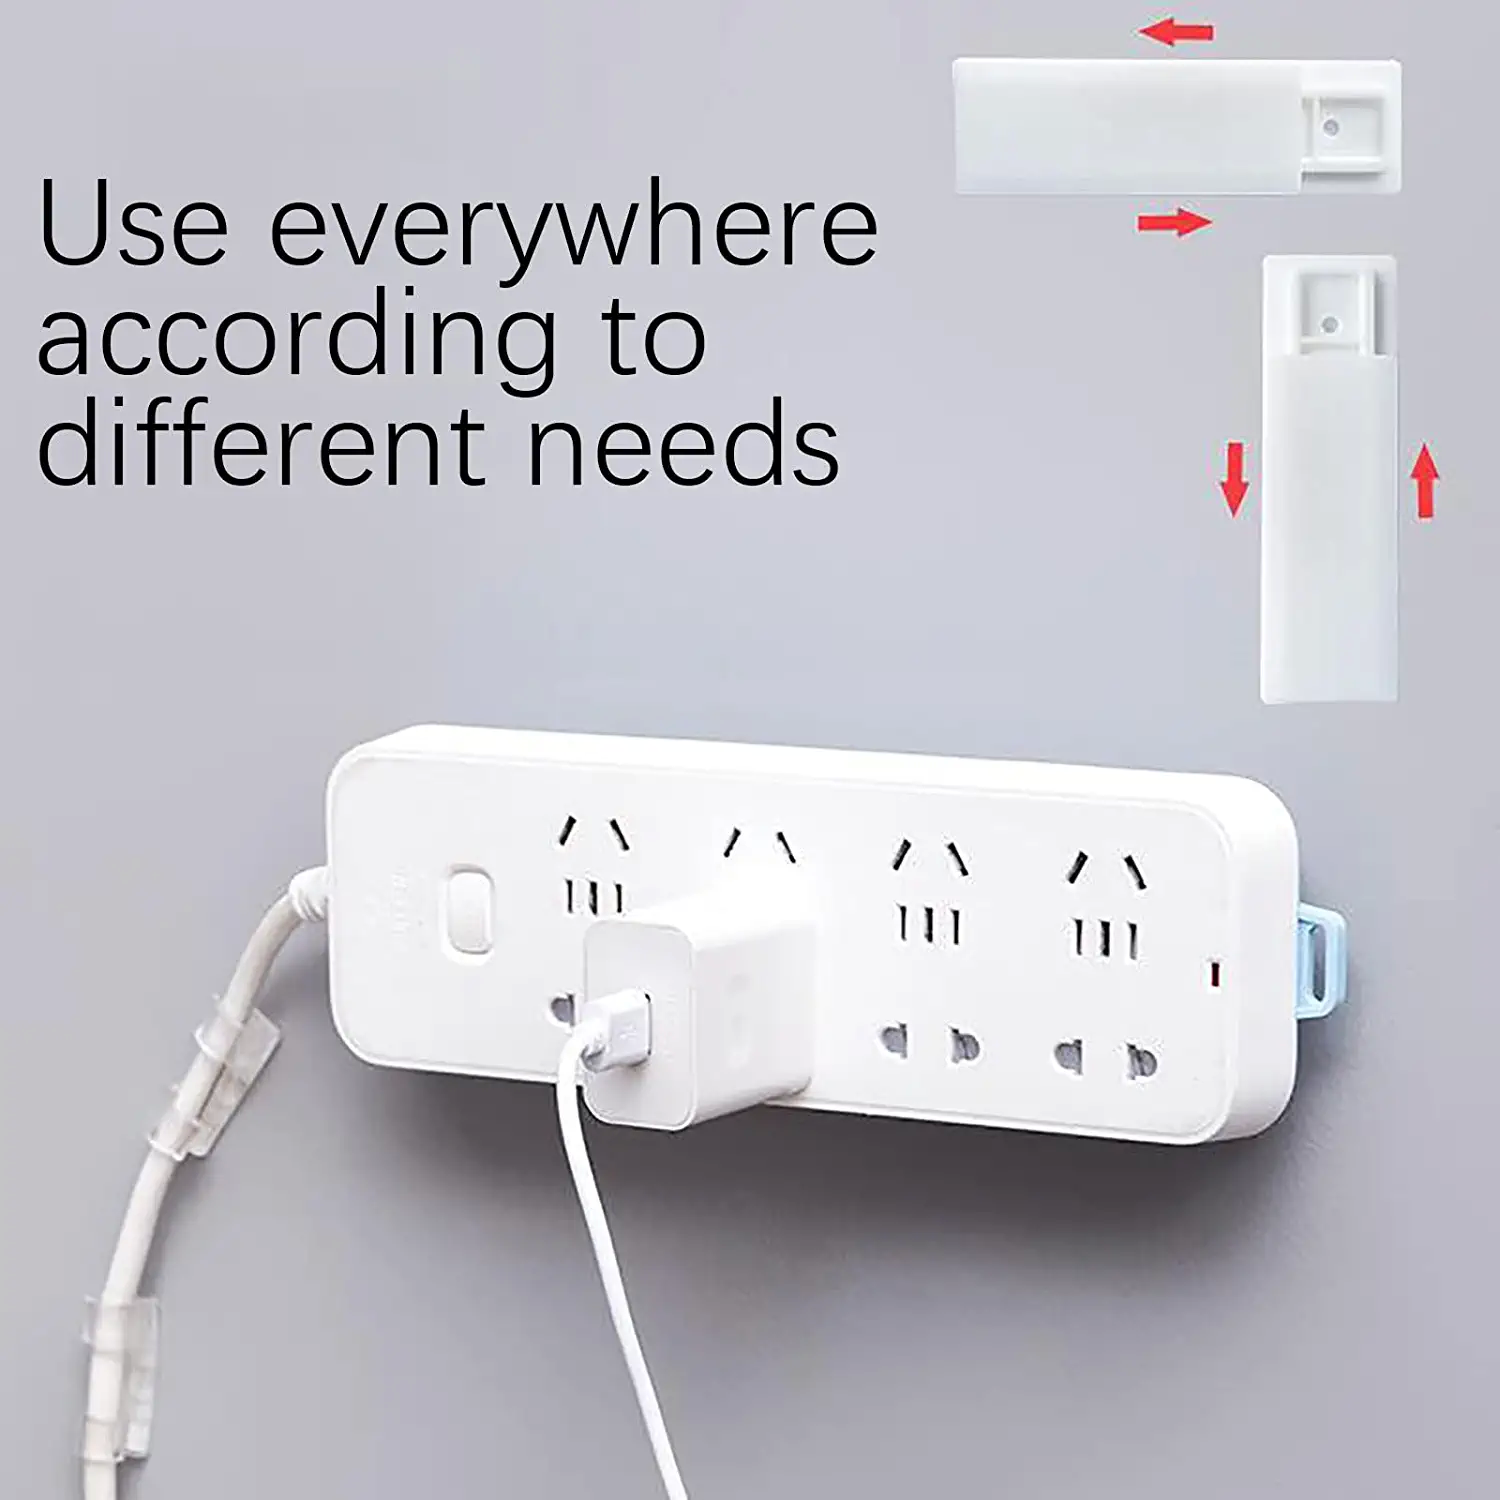 Powerboards-Self-Adhesive-Power-Strip-Holder-Power-Strip-Fixator-Wall-Mount-No-Punch-Socket-Cable-Fixer-for-Surge-WiFi-Router-Tissue-Box-Remote-Control-Organizer-5